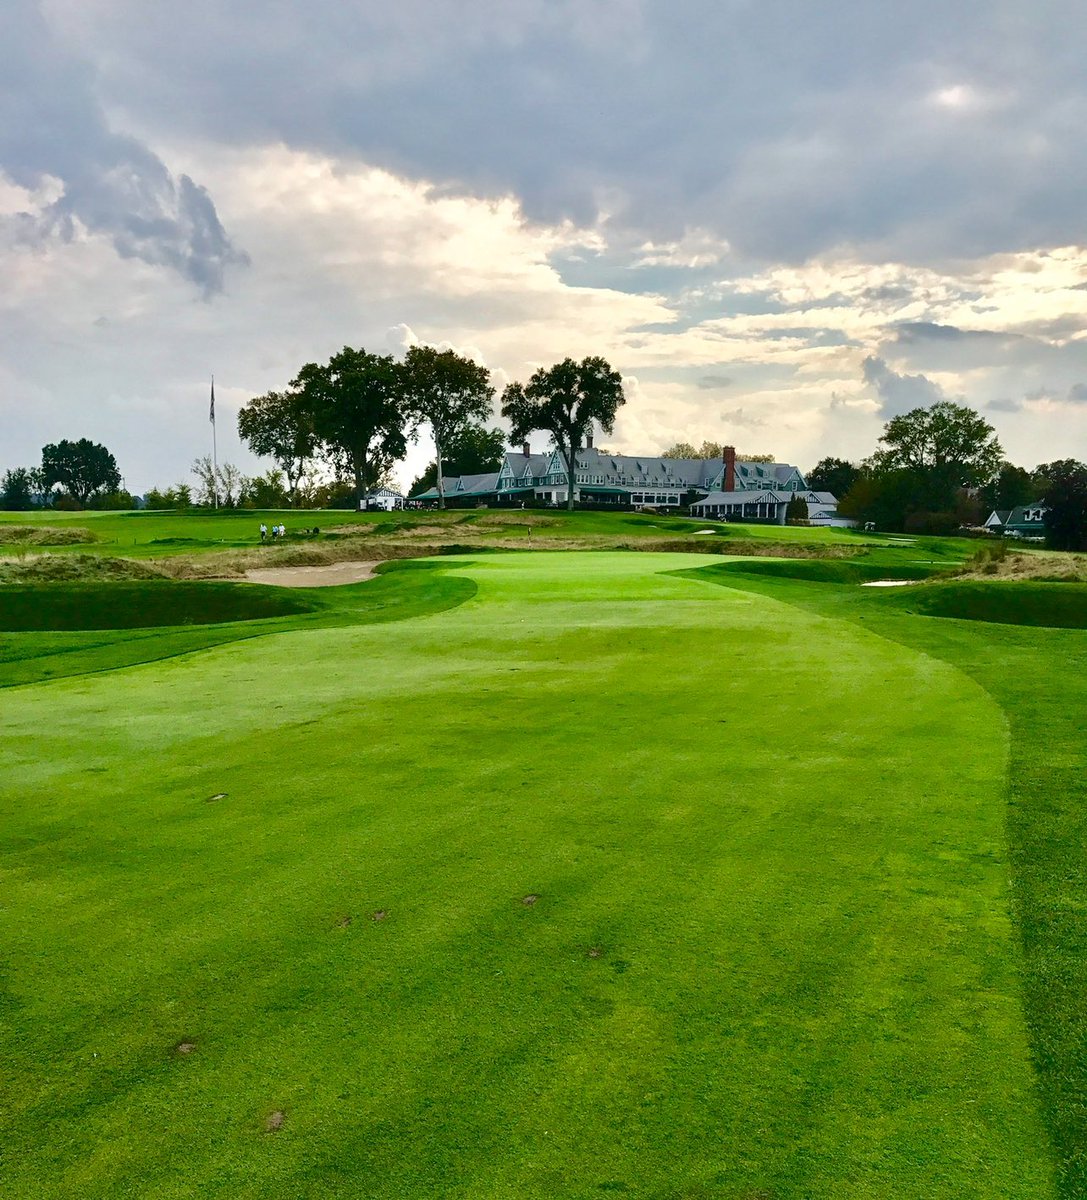 Heading to Oakmont CC next week to see the restorative work Gil Hanse did at the club.

Hope to see you @pagolfhistorian. 

Only time for one round of golf. 
Business before pleasure. 

Can’t wait to see the changes before next year’s U.S. Open! 

#GolfHistory